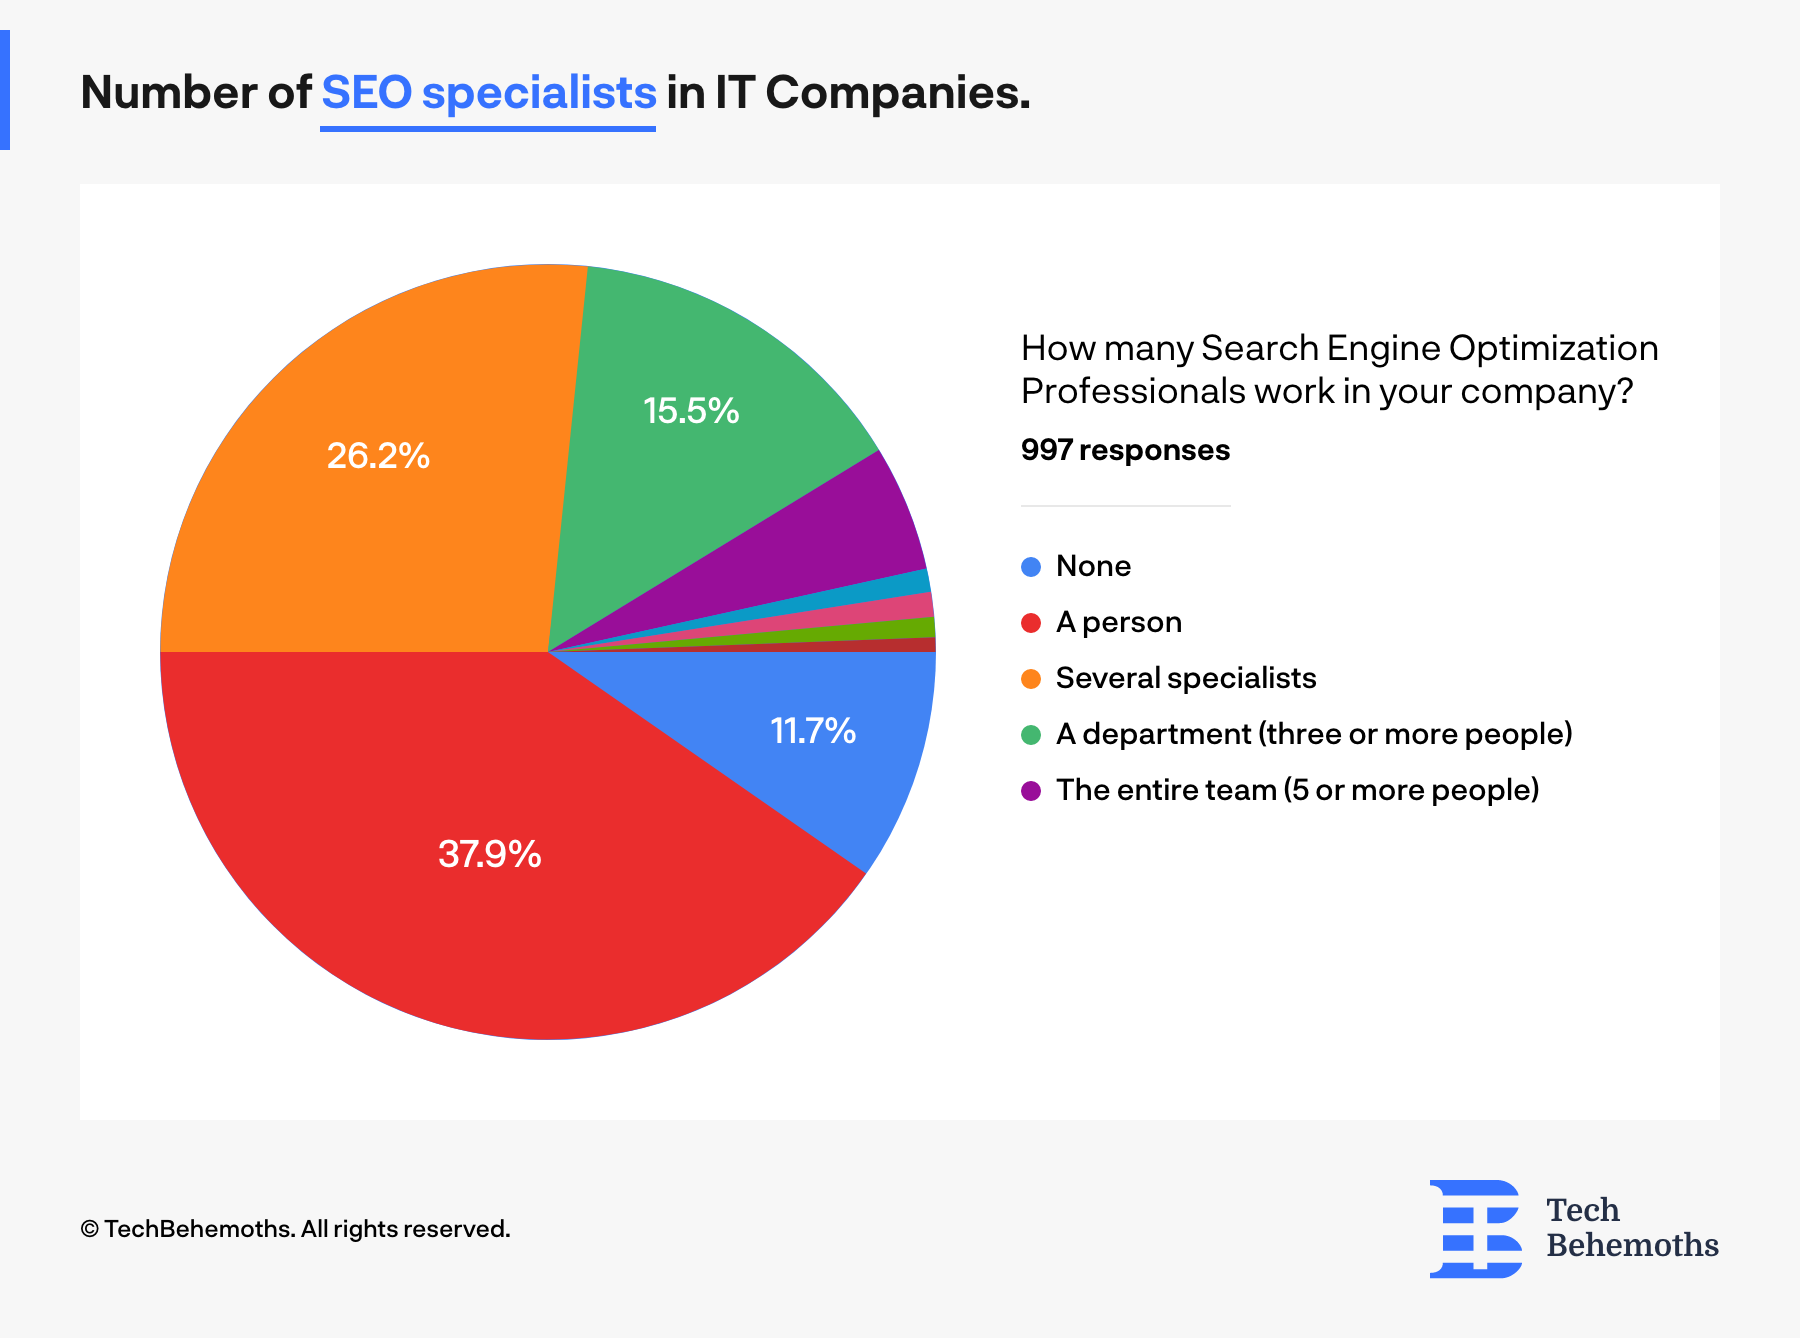 37.9% of IT companies have only one SEO manager